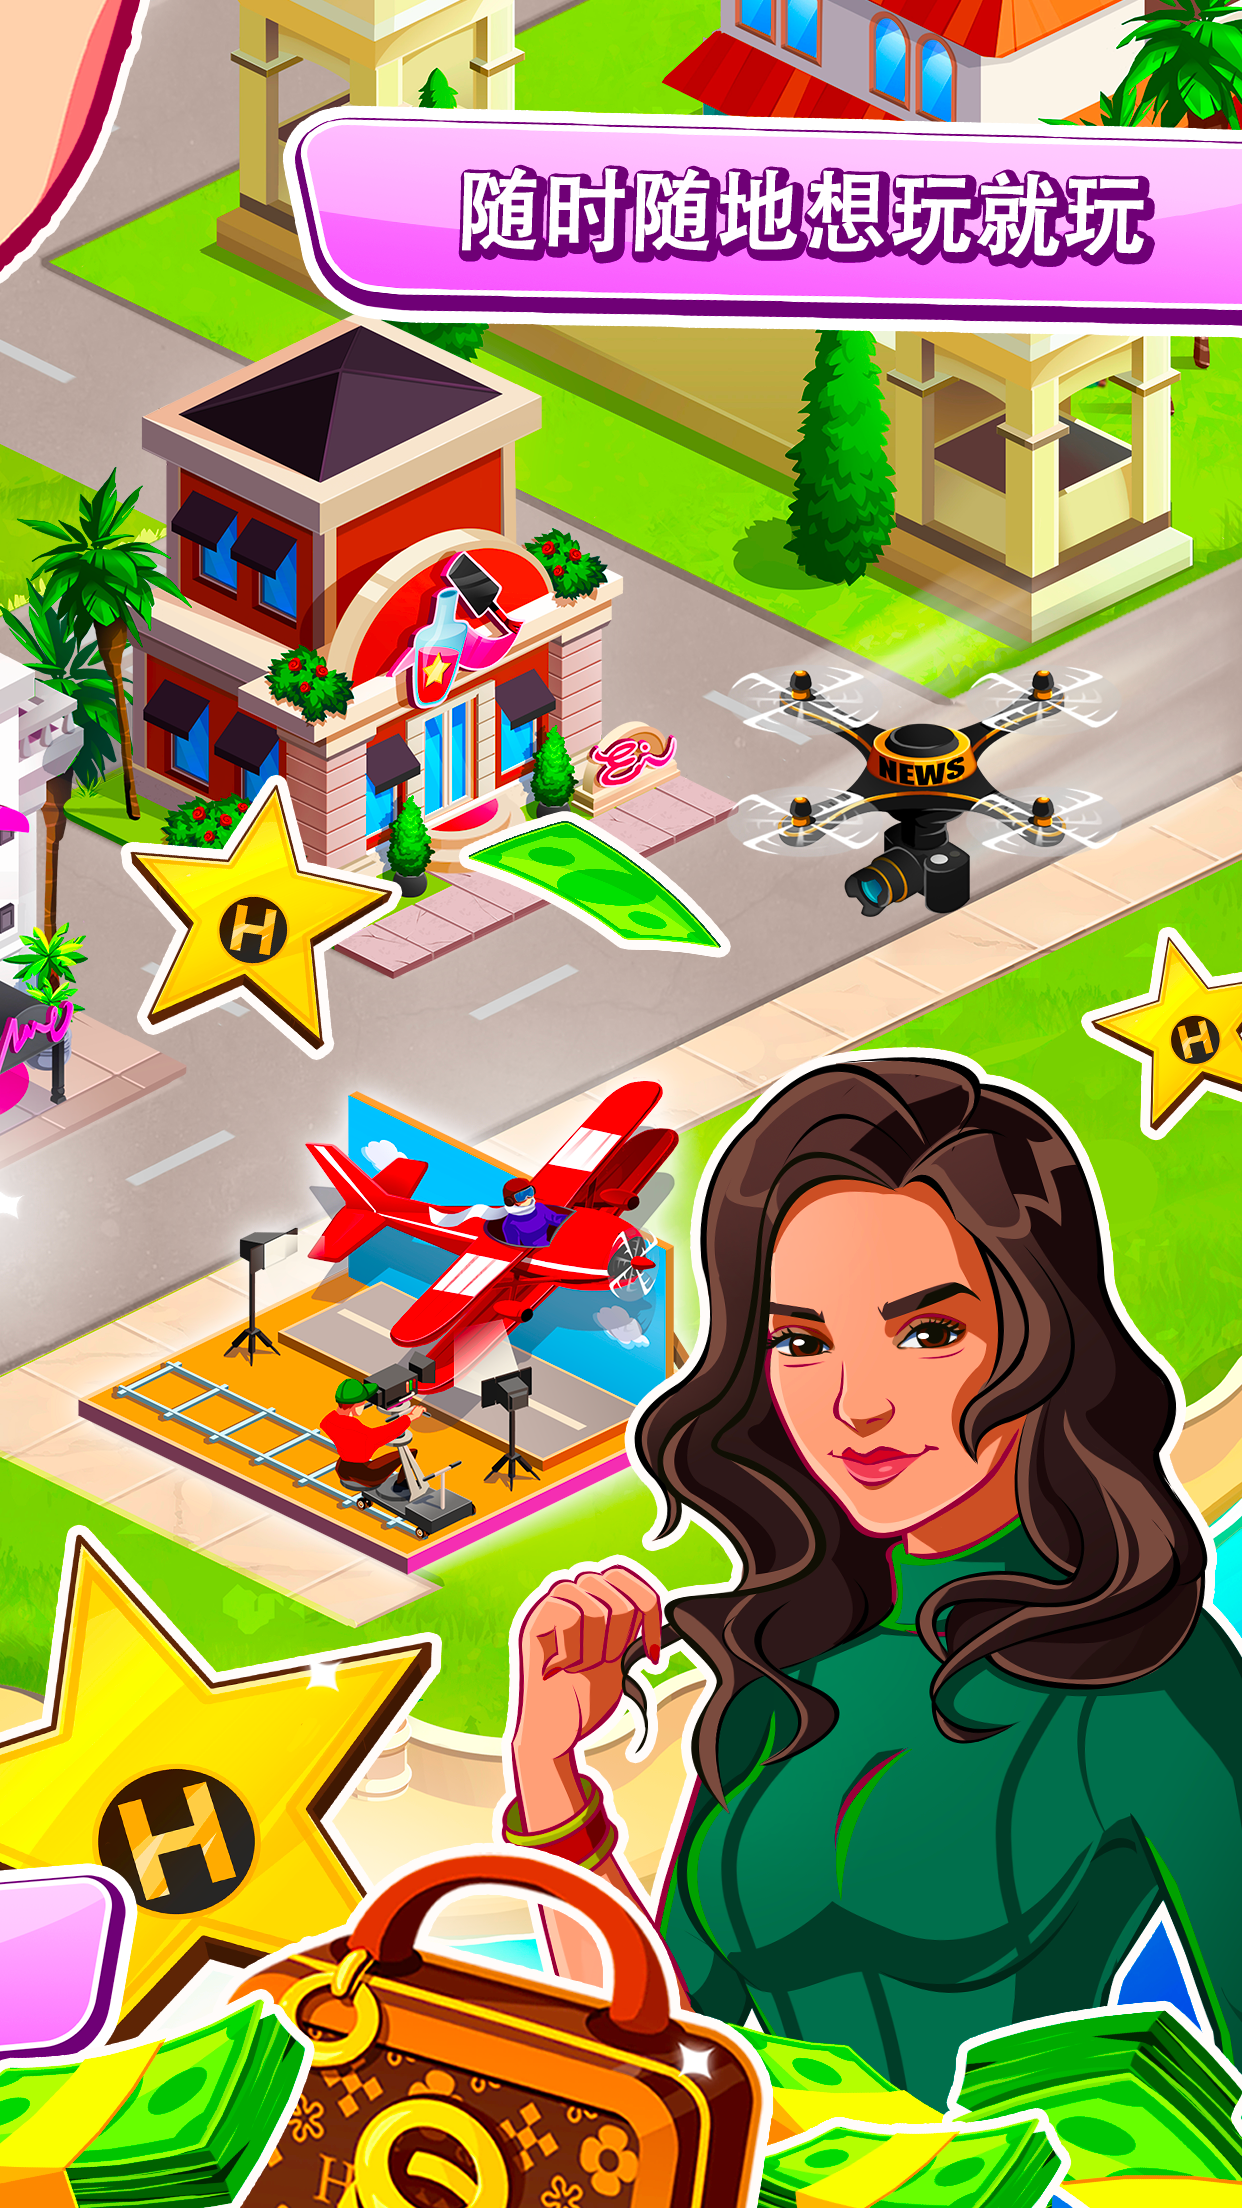 Screenshot 1 of Project Fame: Idle Hollywood Game für Glam Girls 2.0.4